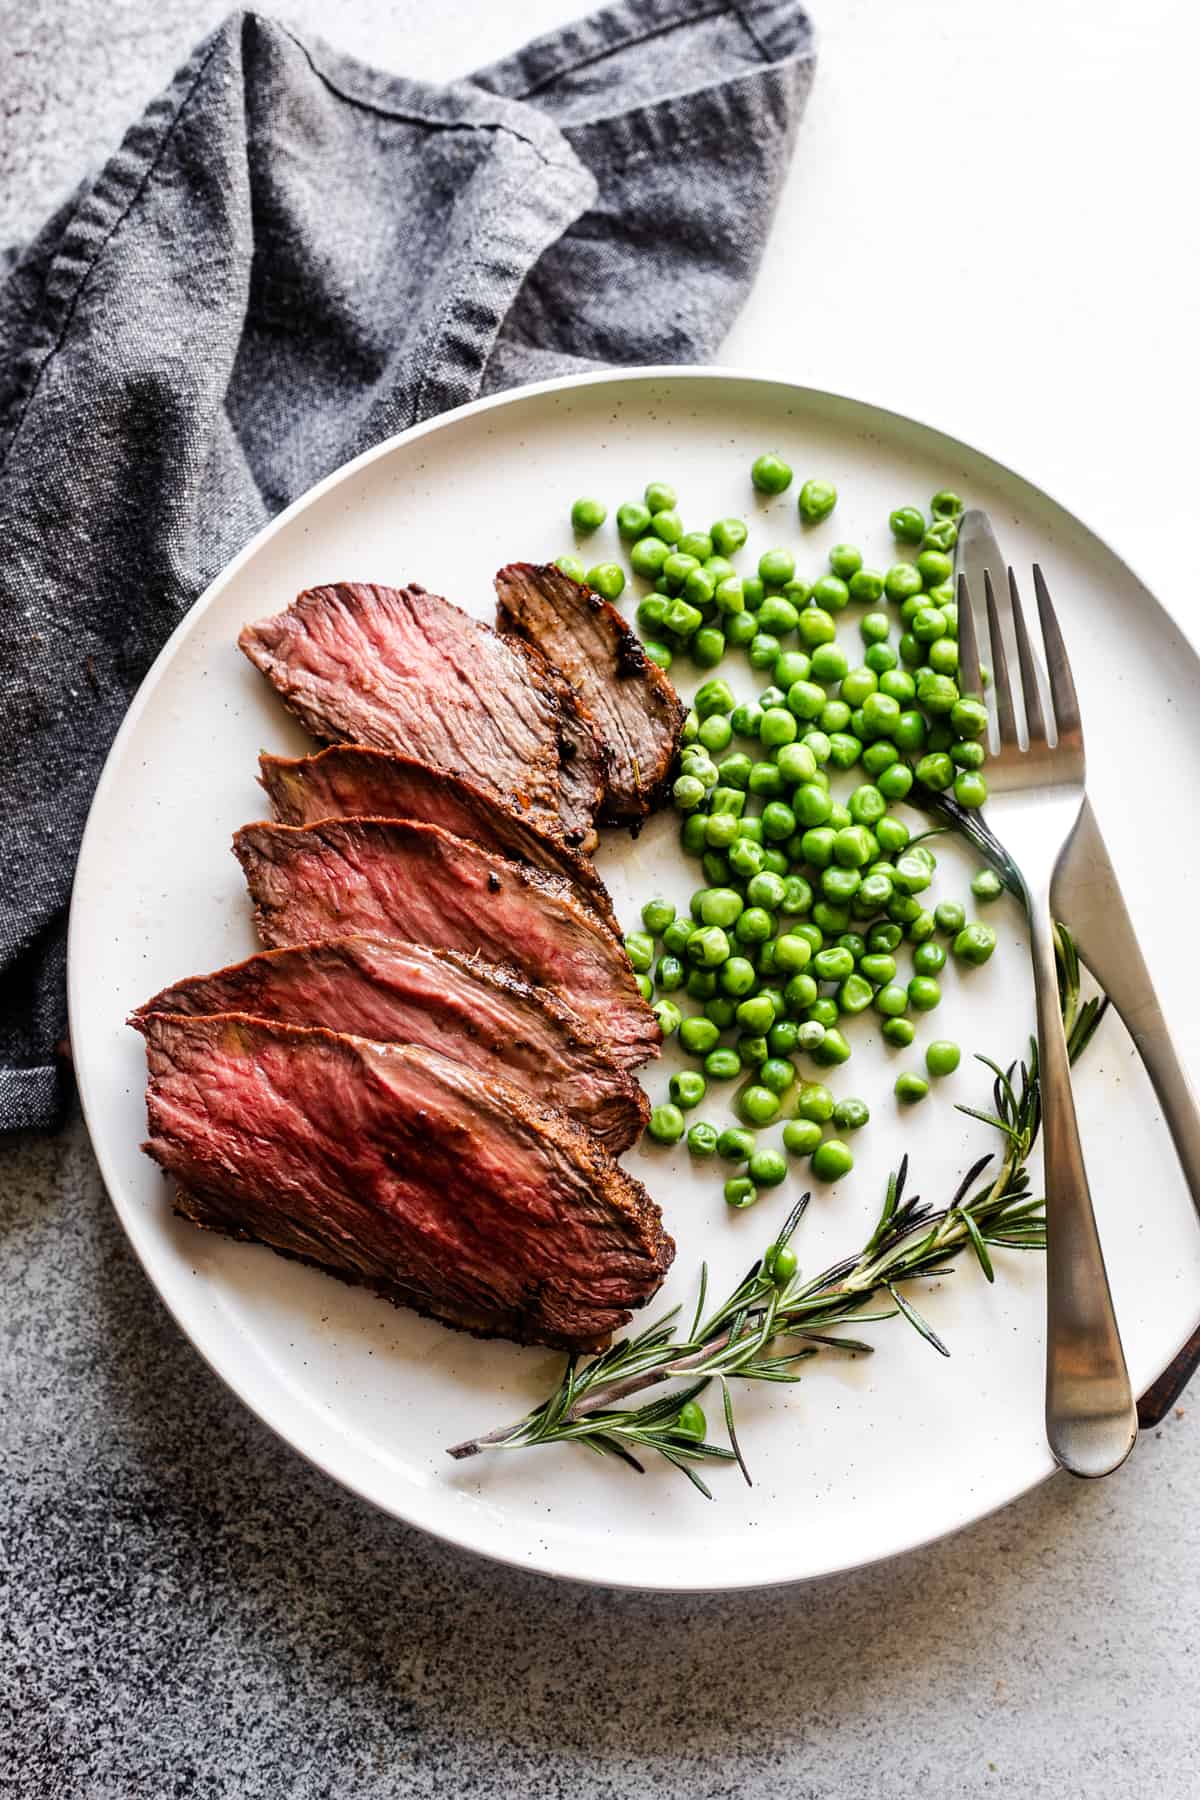 slices of sirloin tip roast arranged on a plate with green peas and a rosemary branch served next to it.